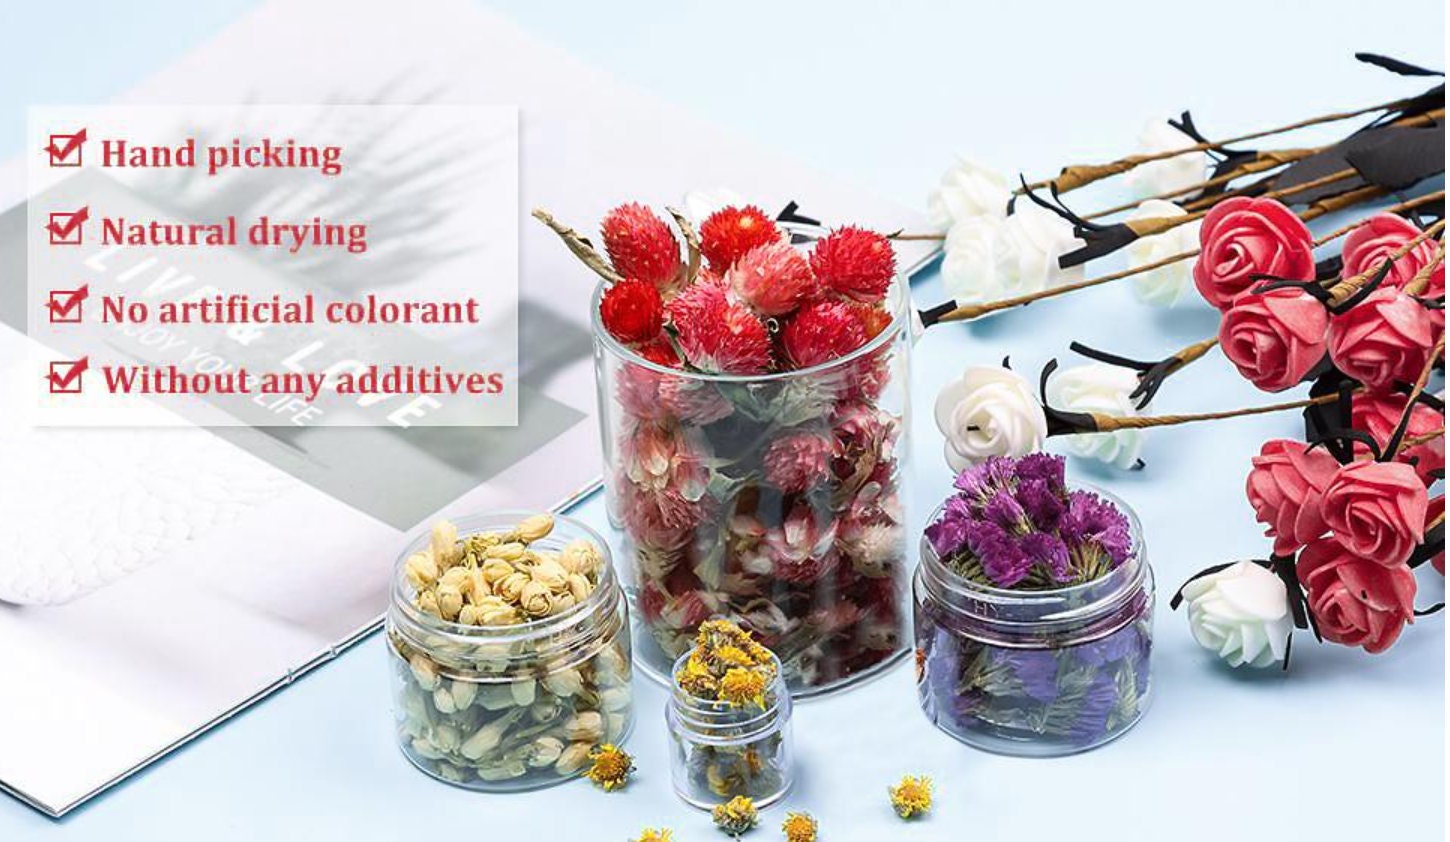 9 Bags Dried Flowers,100% Natural Dried Flowers Herbs Kit for Soap Making, DIY Candle Making,Bath - Include Rose Petals,Lavender,Don't Forget Me